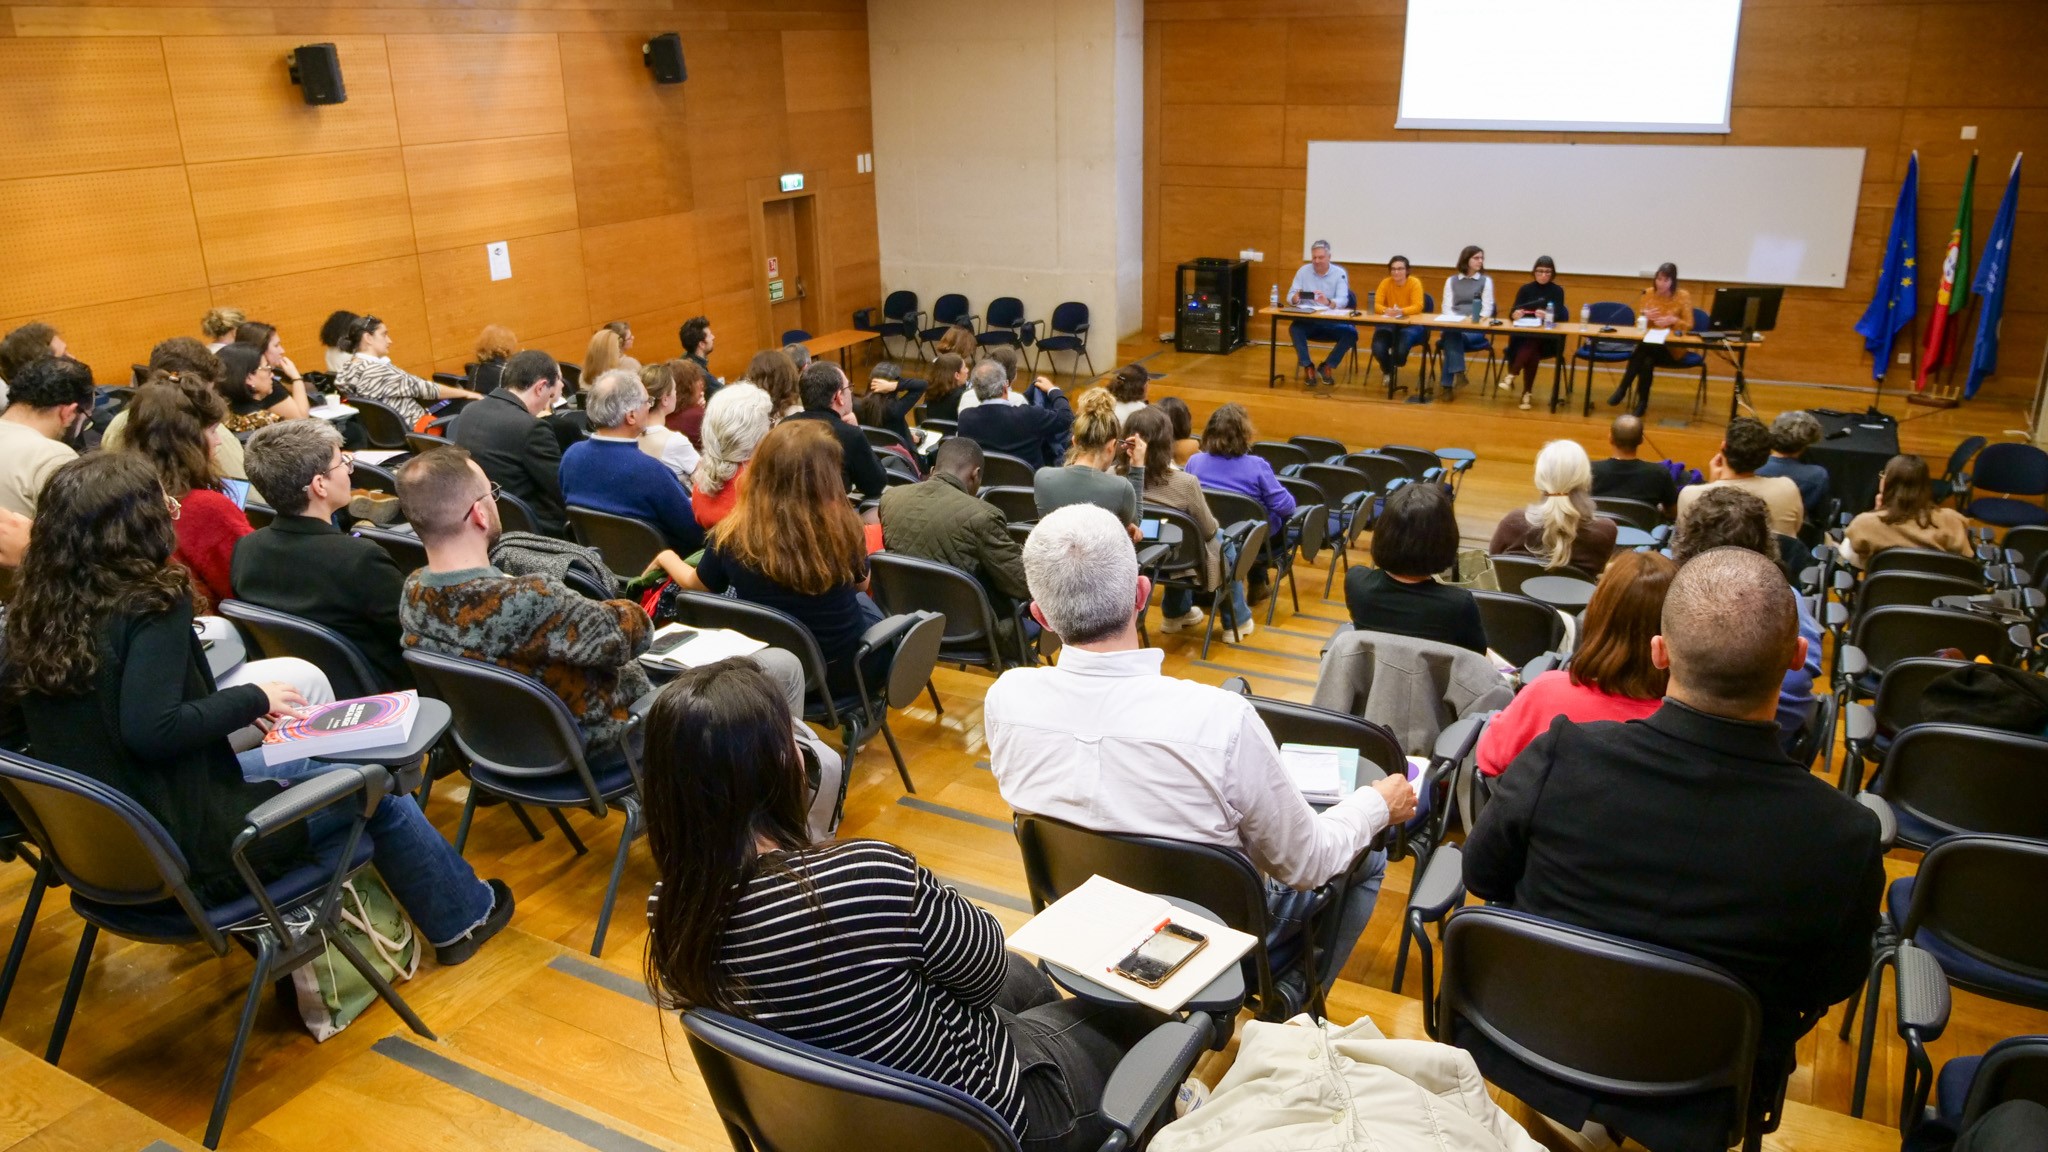 CIES-Iscte discusses new methodological challenges and perspectives